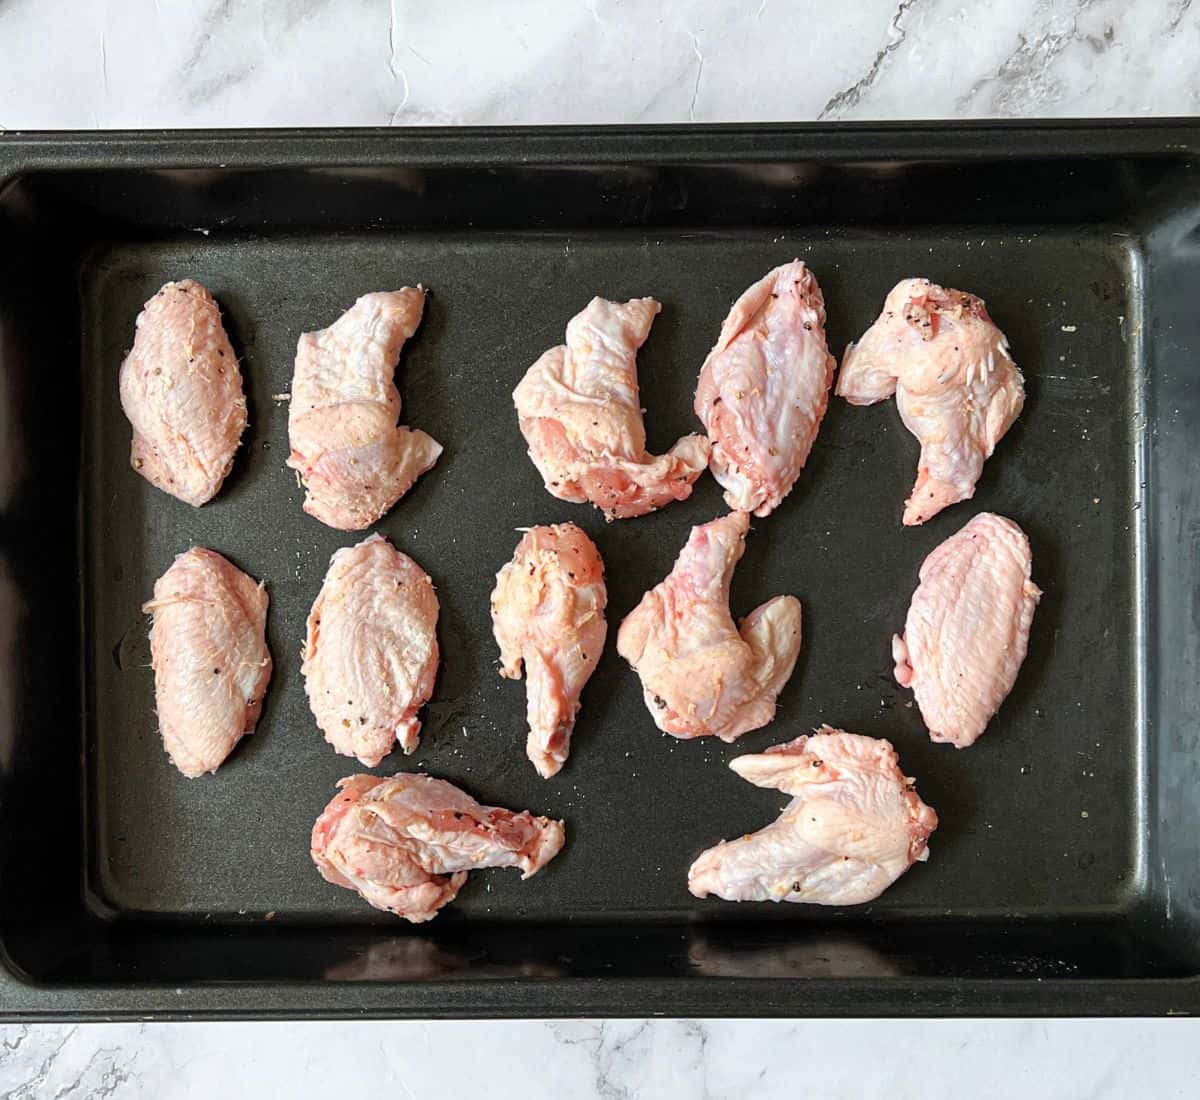 Raw chicken wings on a baking tray.